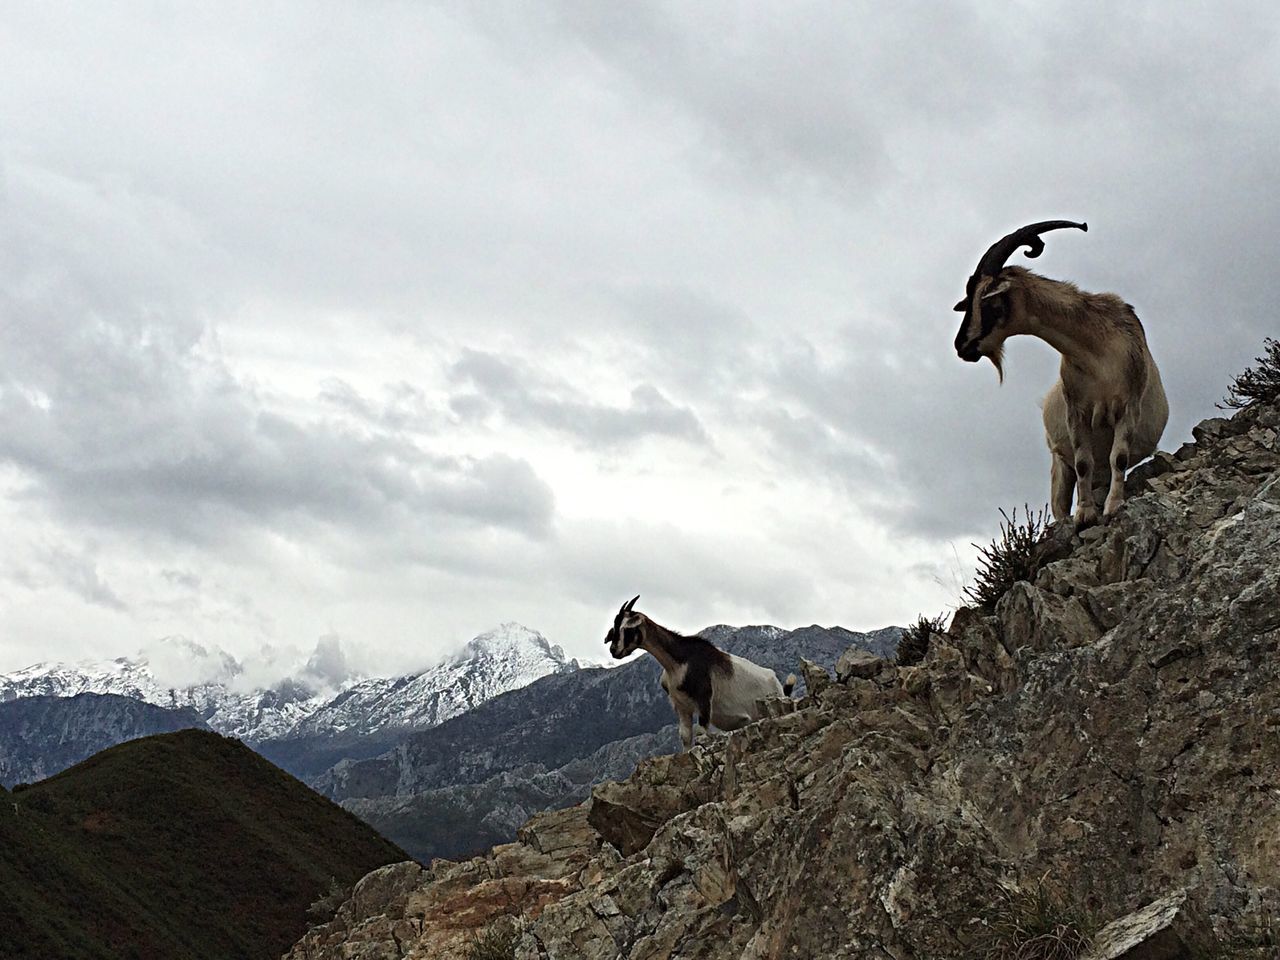 animal themes, sky, mammal, mountain, one animal, cloud - sky, animals in the wild, wildlife, domestic animals, low angle view, standing, full length, cloudy, nature, two animals, mountain range, cloud, landscape, day, rock - object